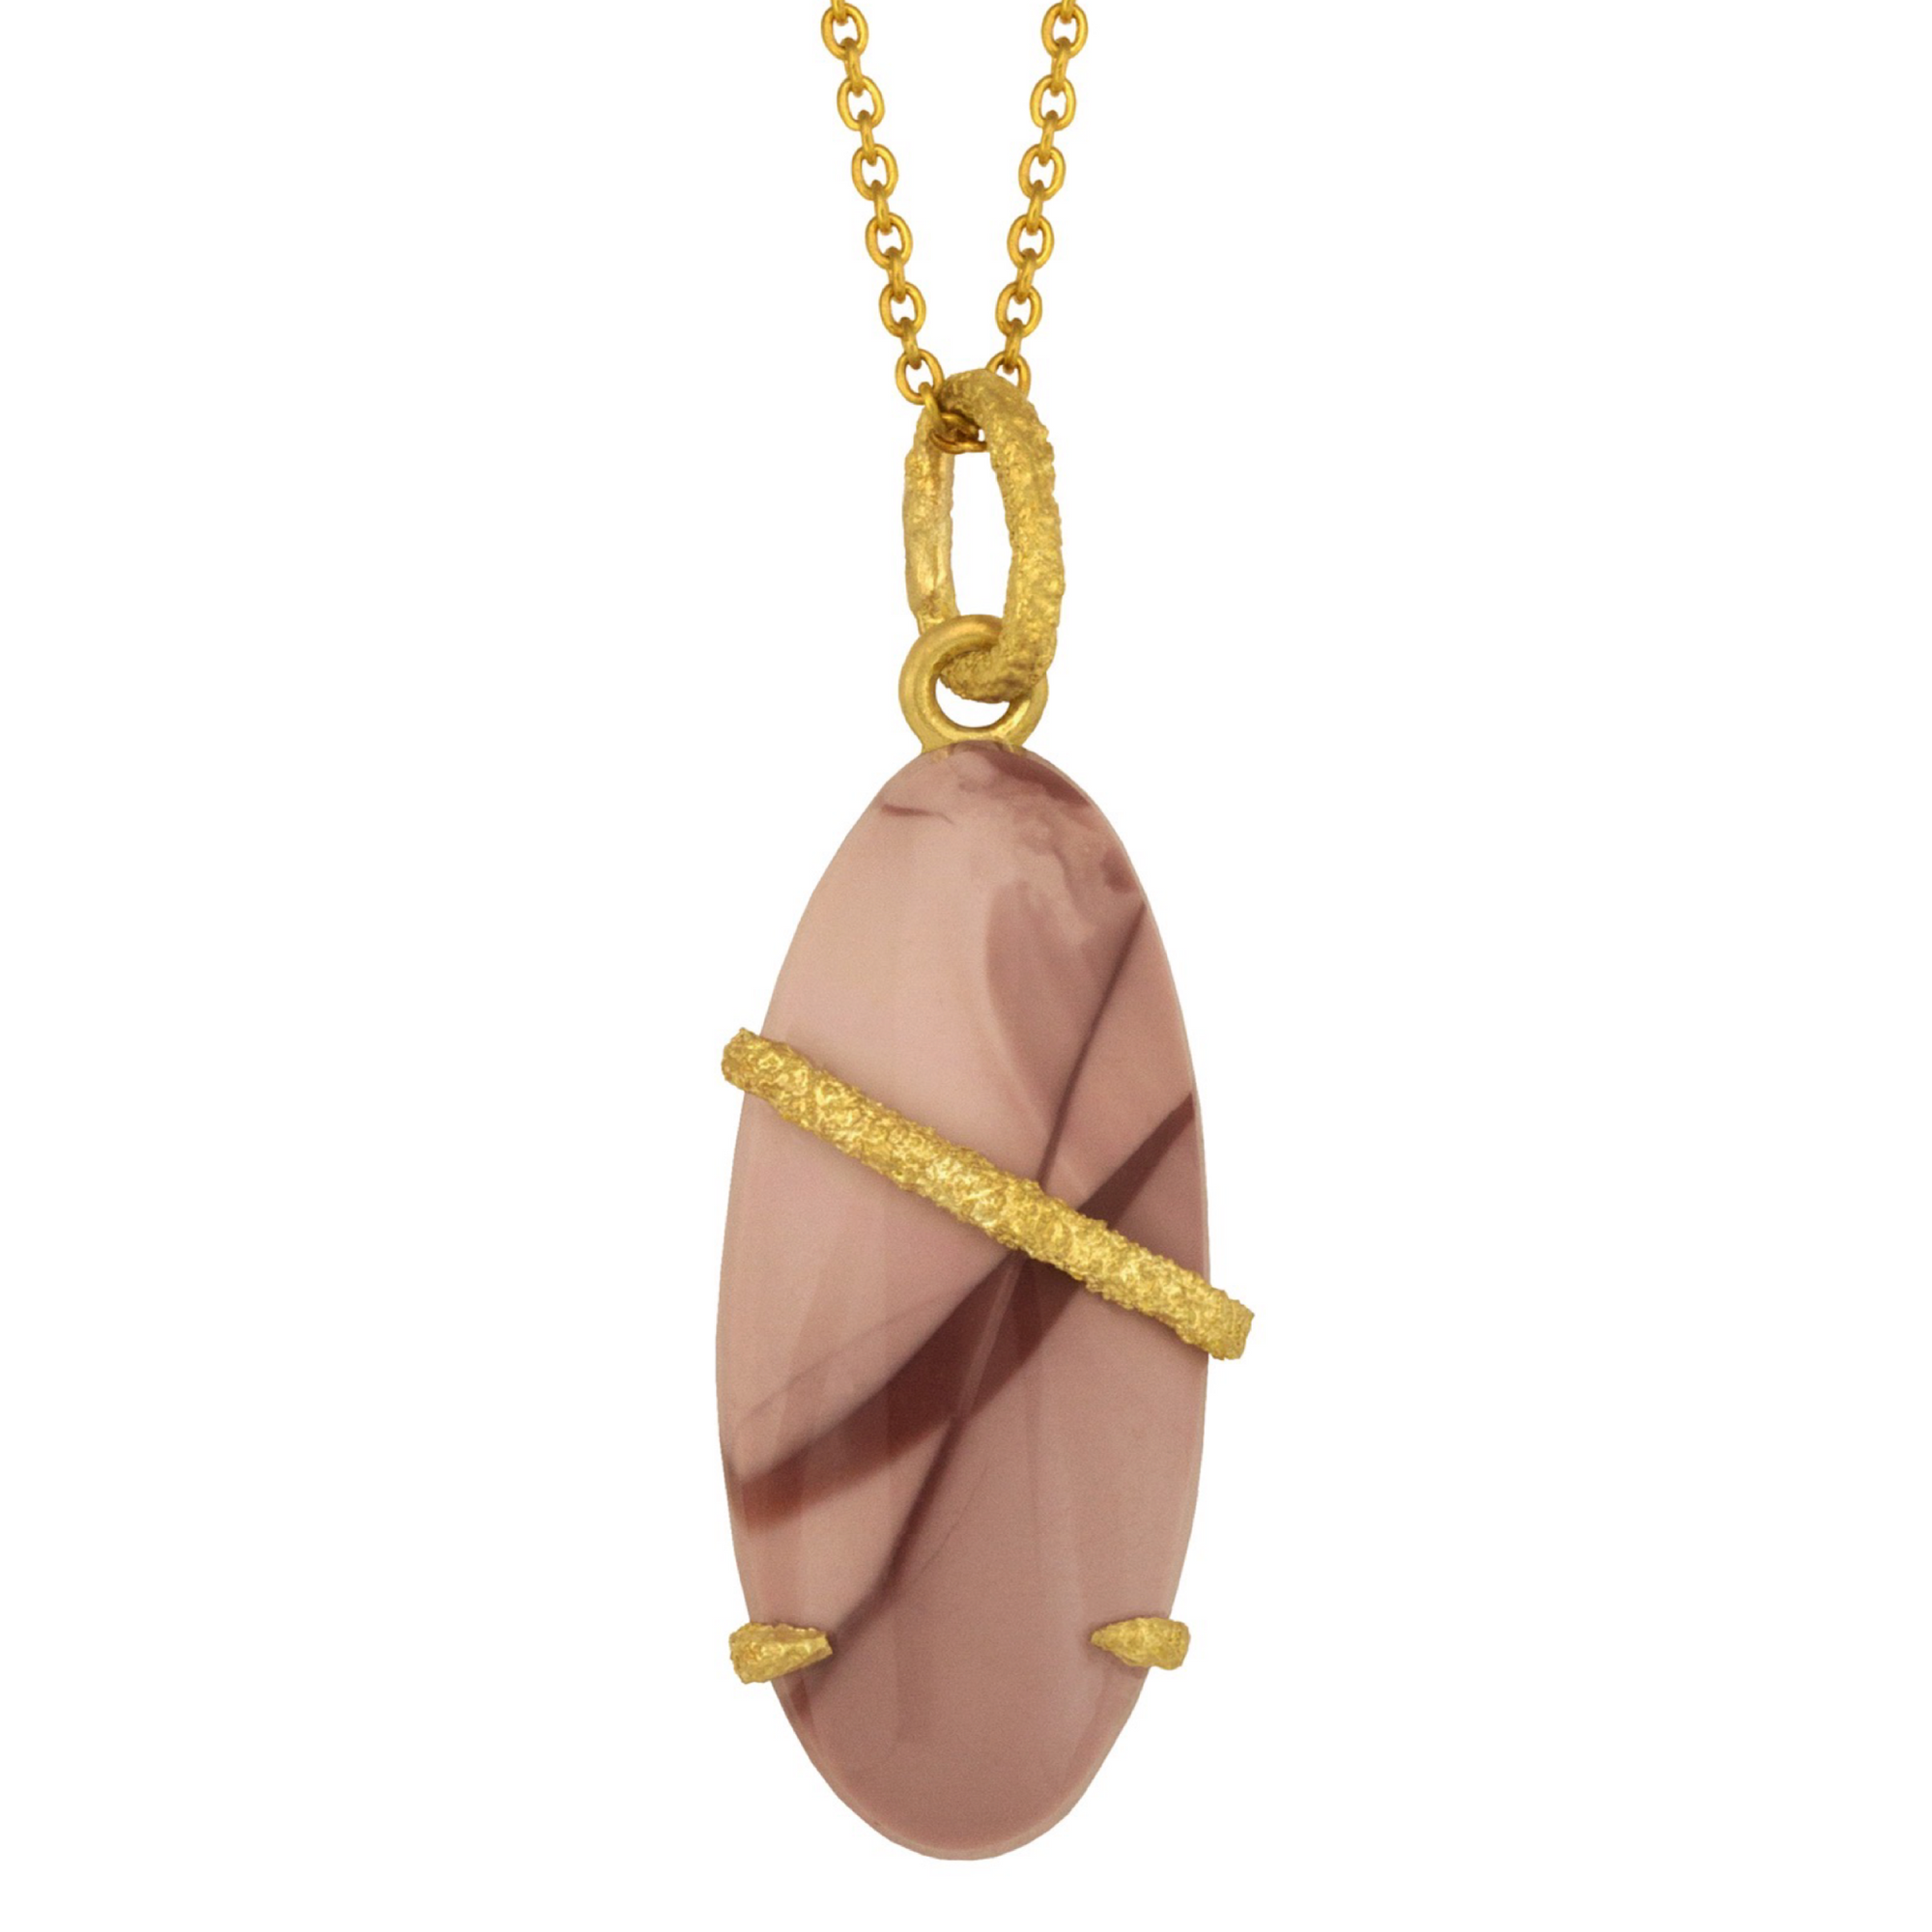 Imperial Jasper Ribbon Necklace by Laurie Kaiser available at Talisman Collection Fine Jewelers in El Dorado Hills, CA and online. This beautiful, pink Imperial jasper pendant is wrapped with a graceful ribbon of 18k yellow gold. Jasper is believed to promote feelings of tranquility and calm, making this necklace not just a stylish accessory, but a meaningful one as well. The necklace is offered with your choice of 18" blackened silver chain or 18" 18k yellow gold chain.